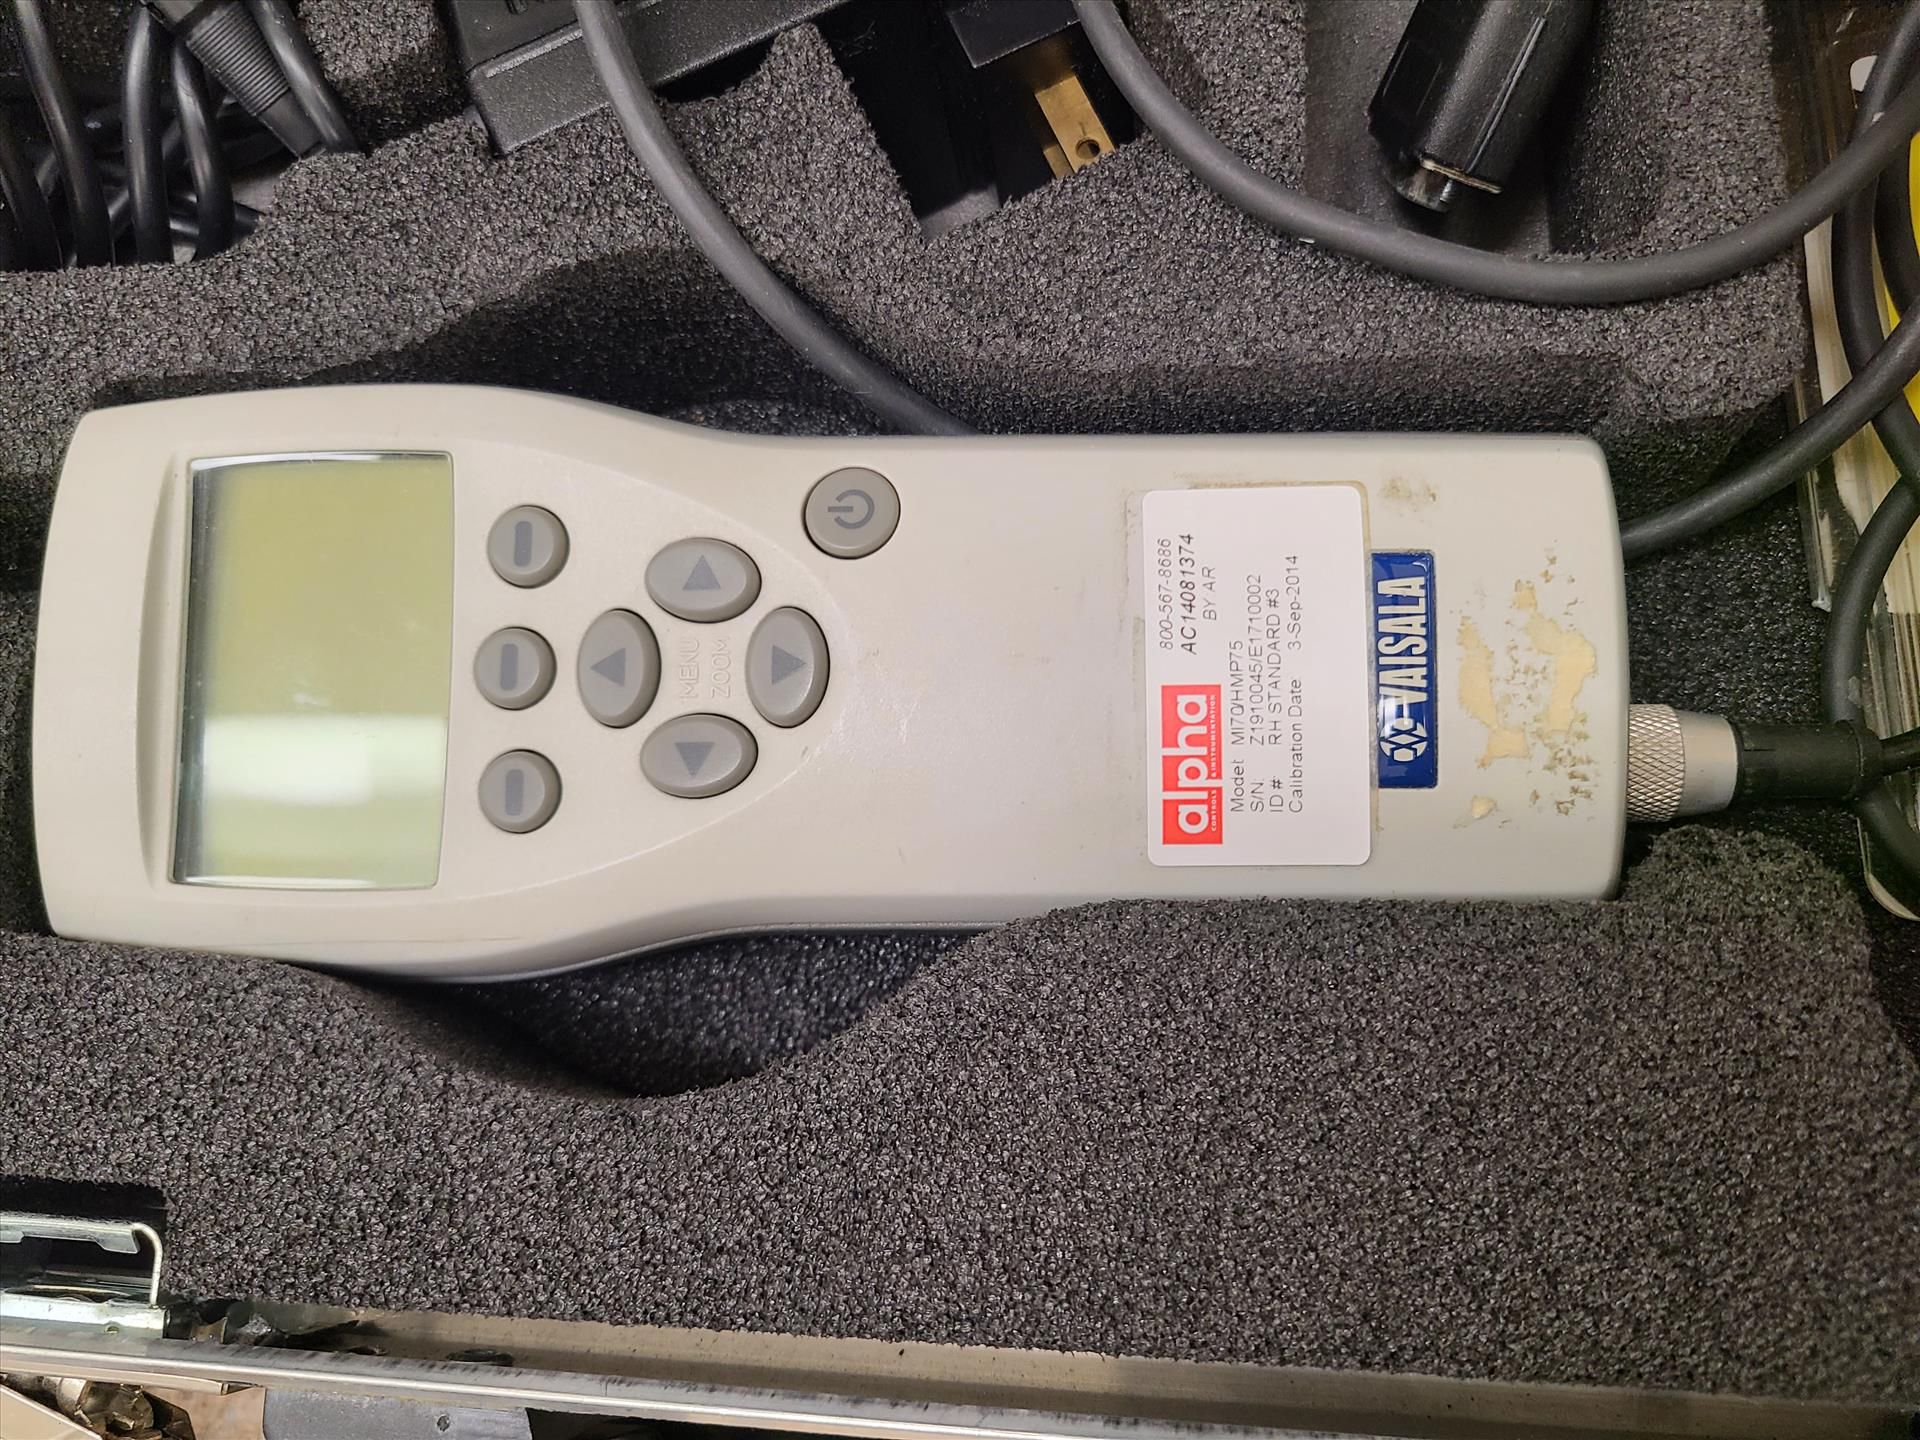 Vaisala Handheld Humidity and Temperature Meter, mod. MI70, ser. no. Z1910045, w/ RH and T Probe, - Image 2 of 2